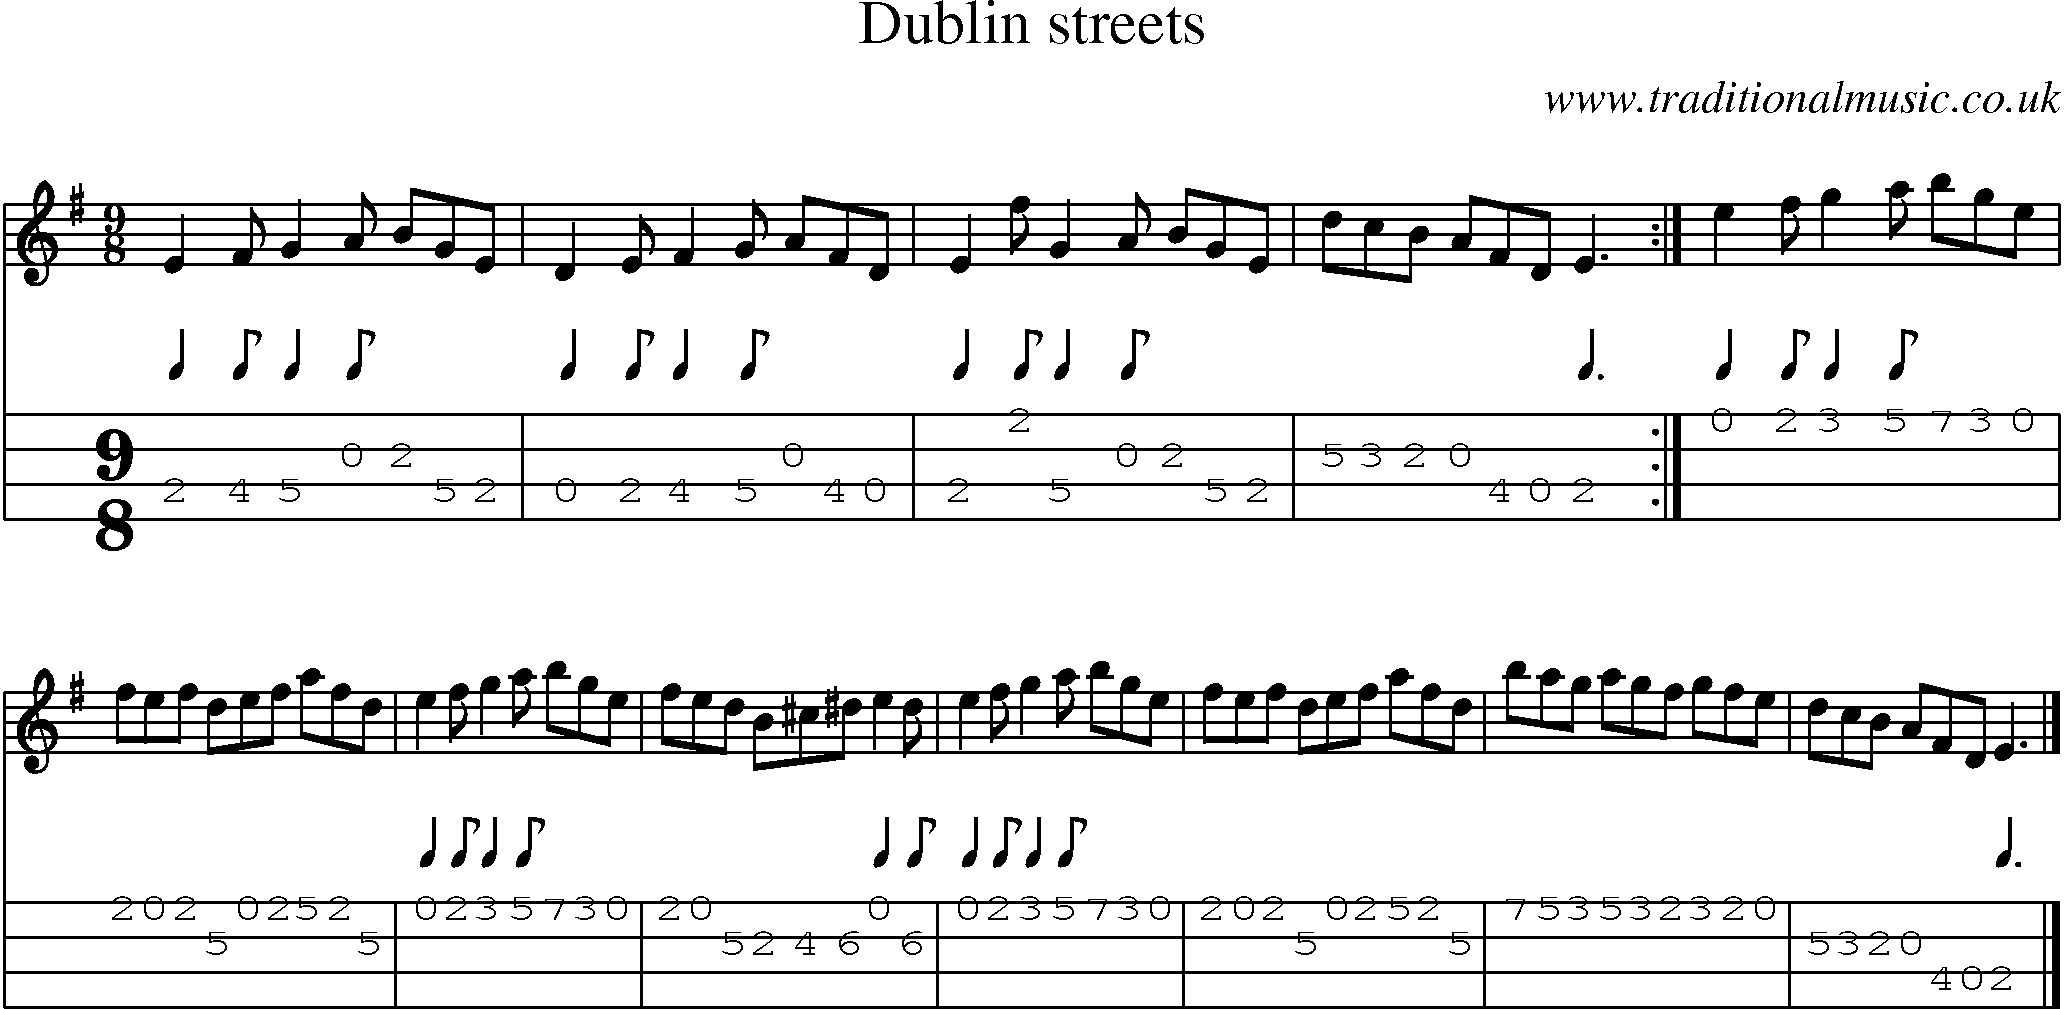 Music Score and Mandolin Tabs for Dublin Streets